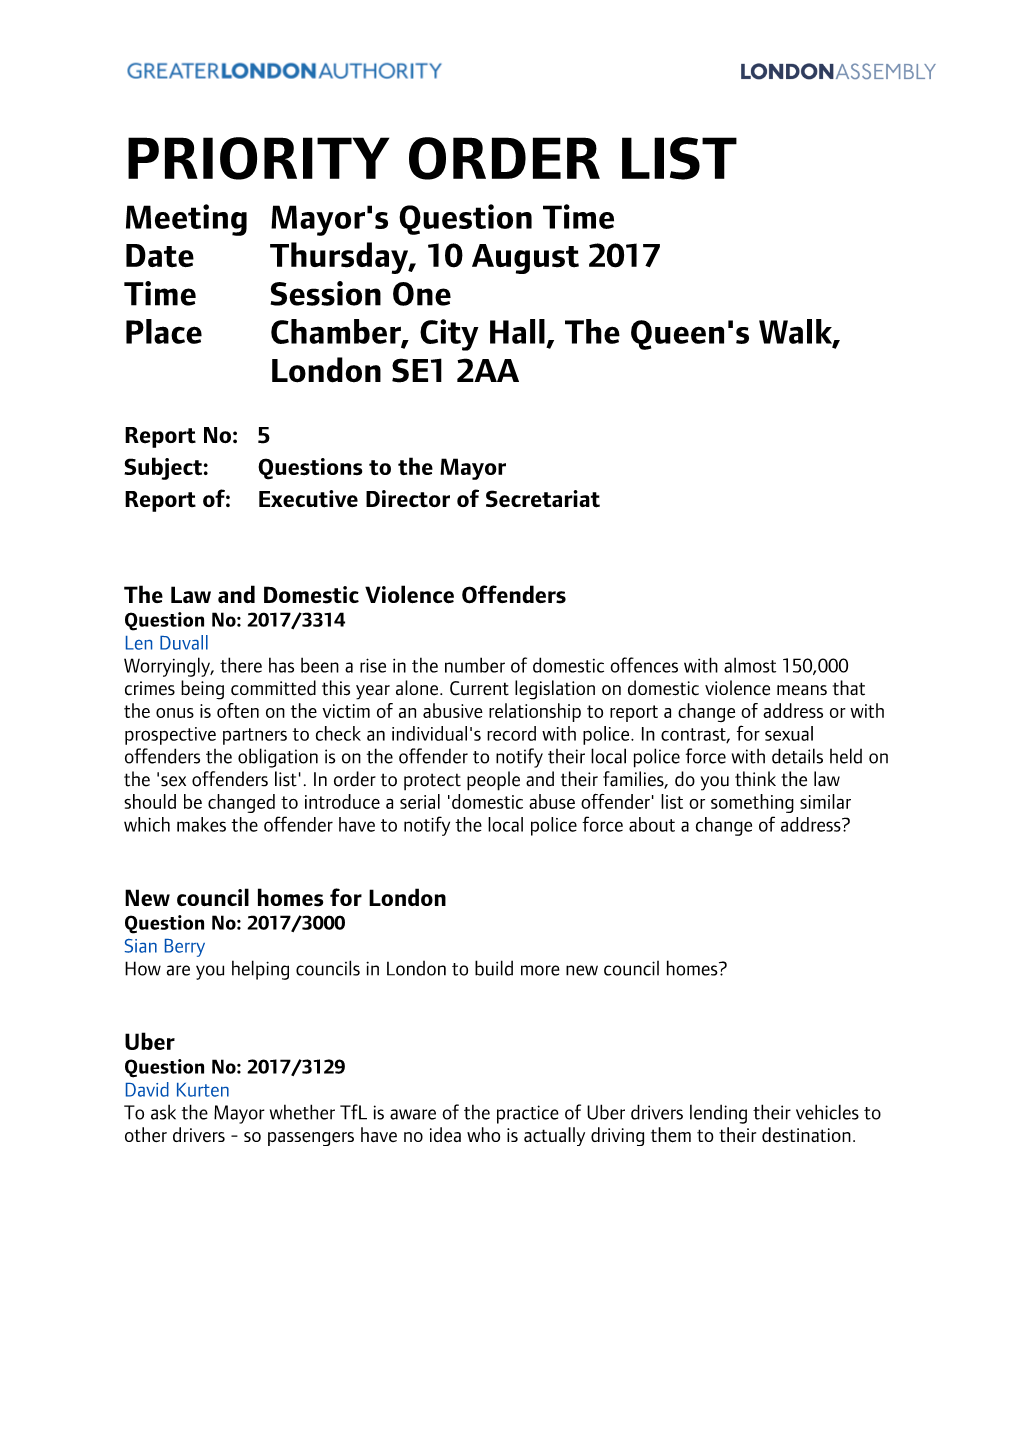 PRIORITY ORDER LIST Meeting Mayor's Question Time Date Thursday, 10 August 2017 Time Session One Place Chamber, City Hall, the Queen's Walk, London SE1 2AA